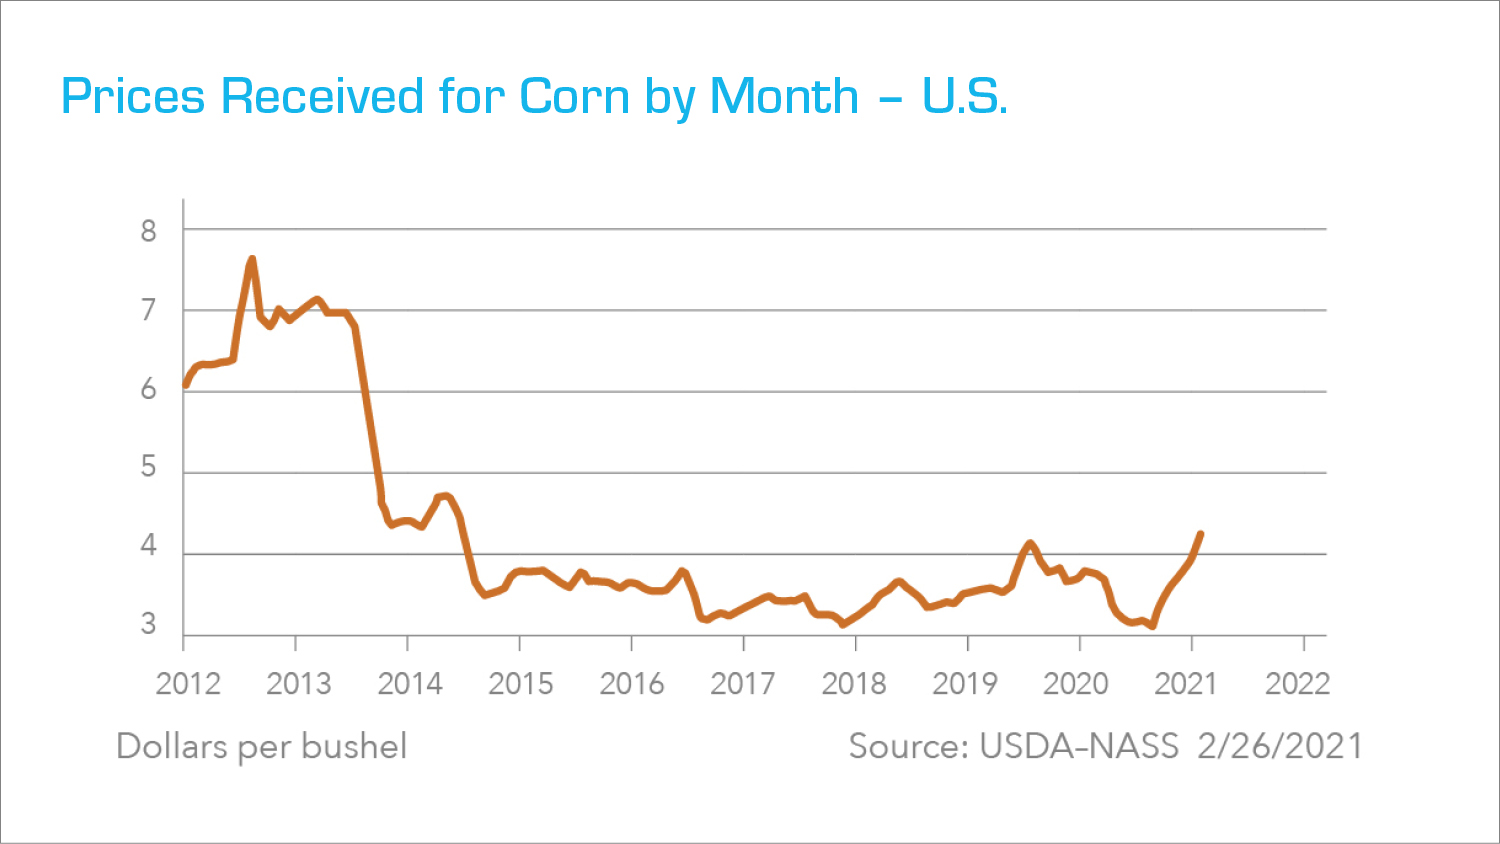 prices received for corn9a9e01c156f5681a826dff00000cea79